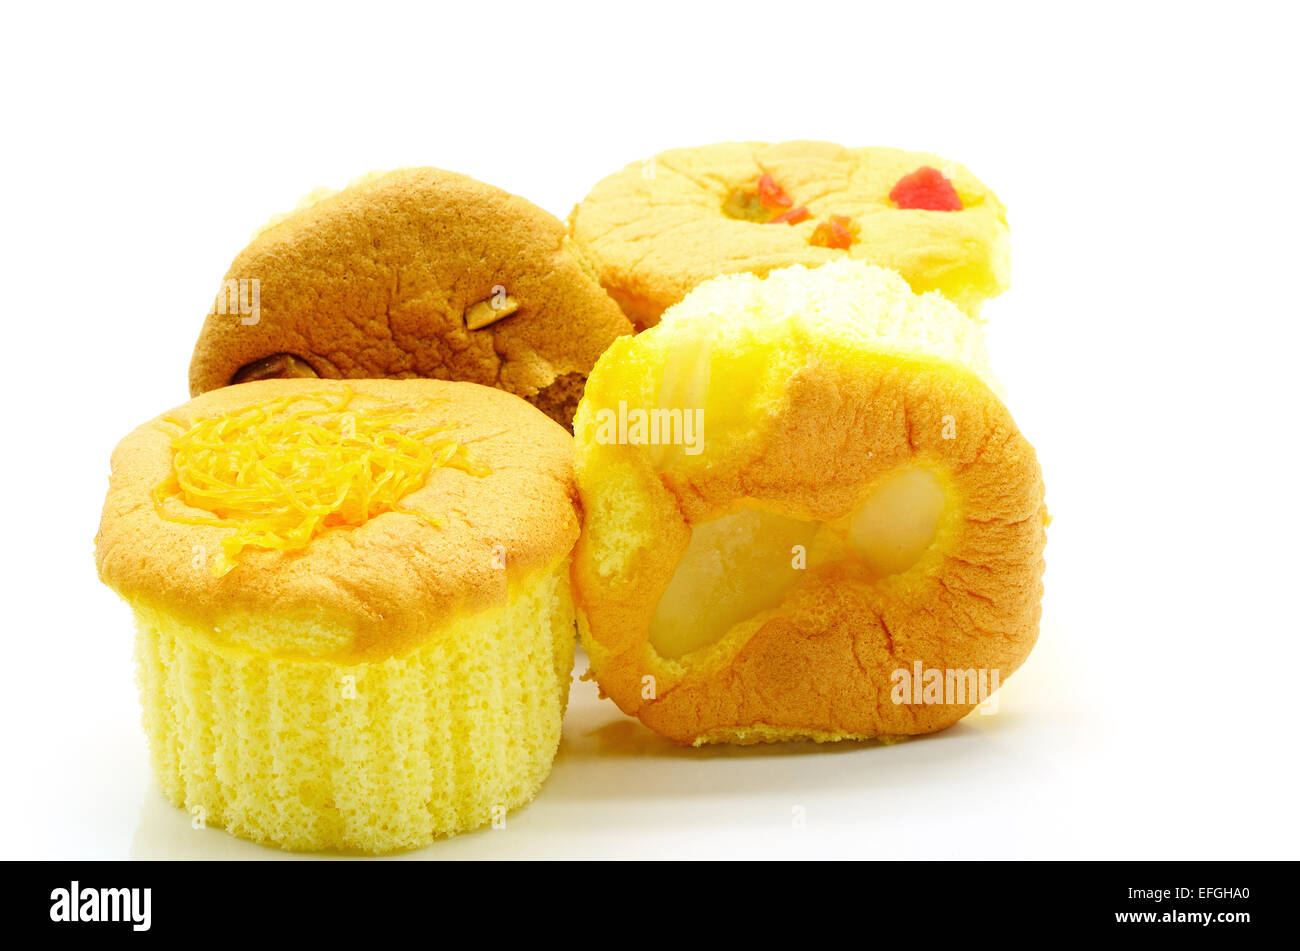 Muffins savoureux gâteau, isolated on white Banque D'Images